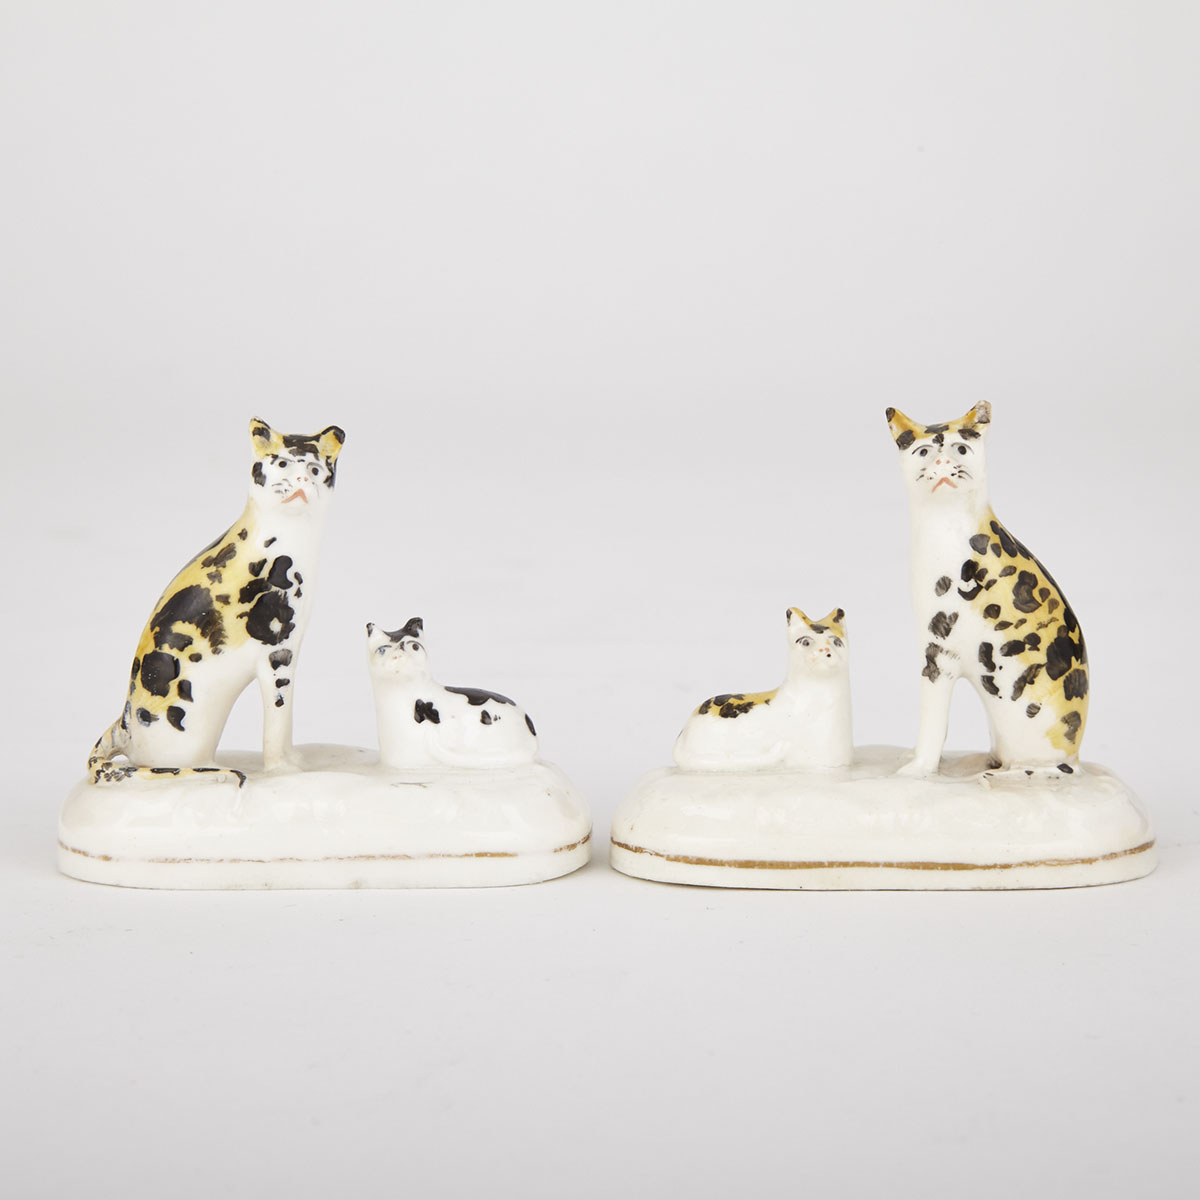 Pair of Staffordshire Porcelain Groups of Cats, c.1835